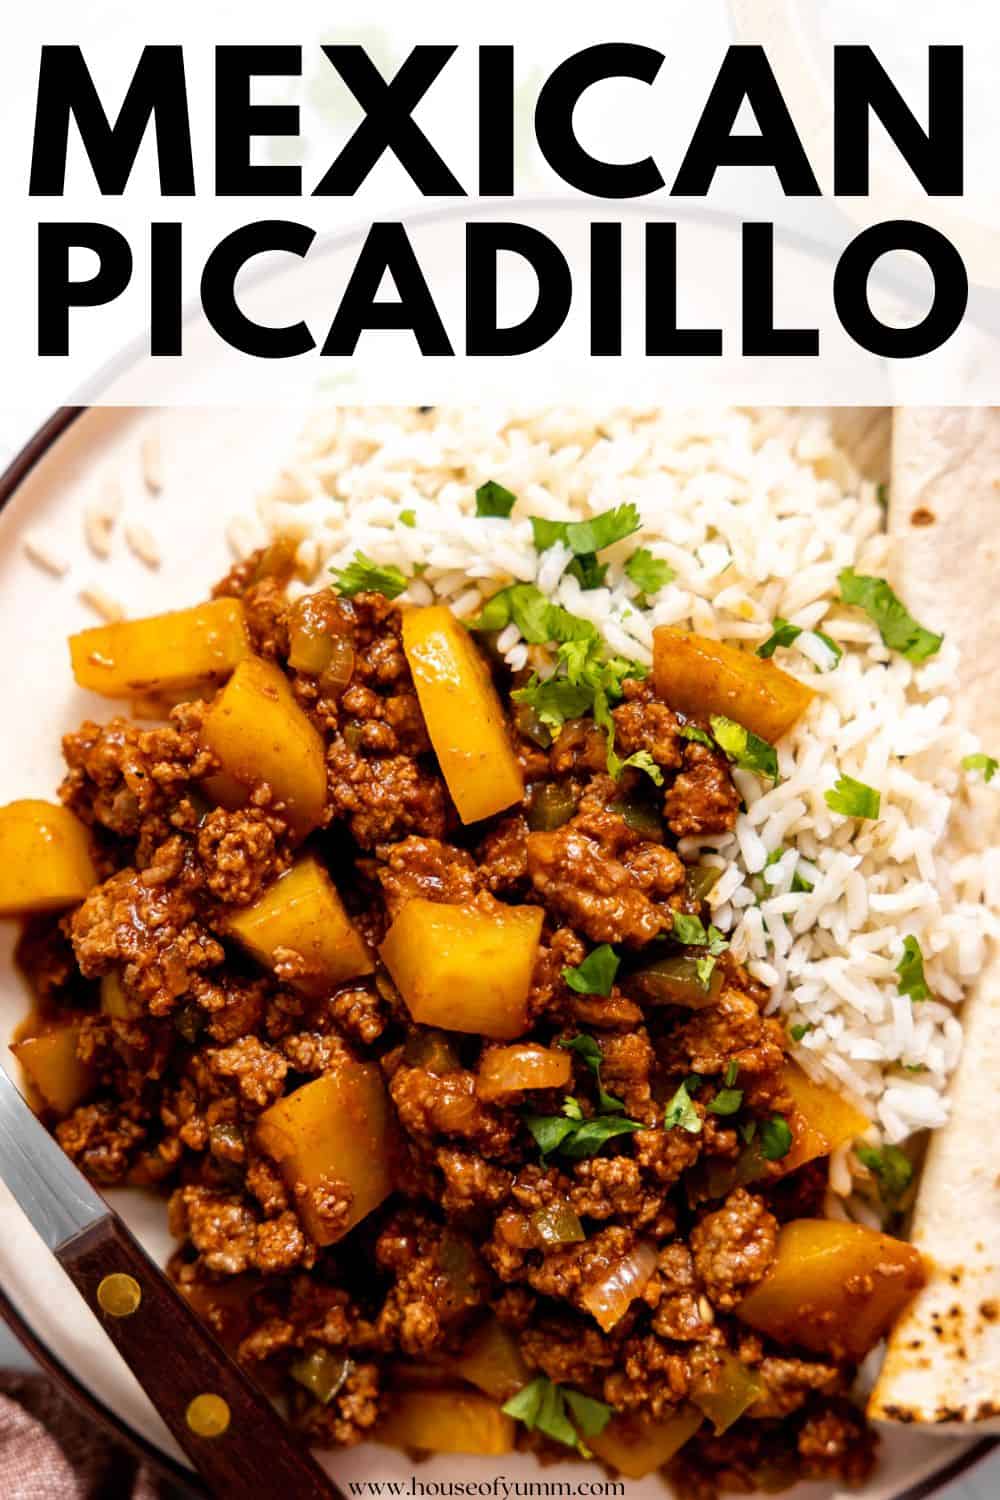 Mexican picadillo with text.